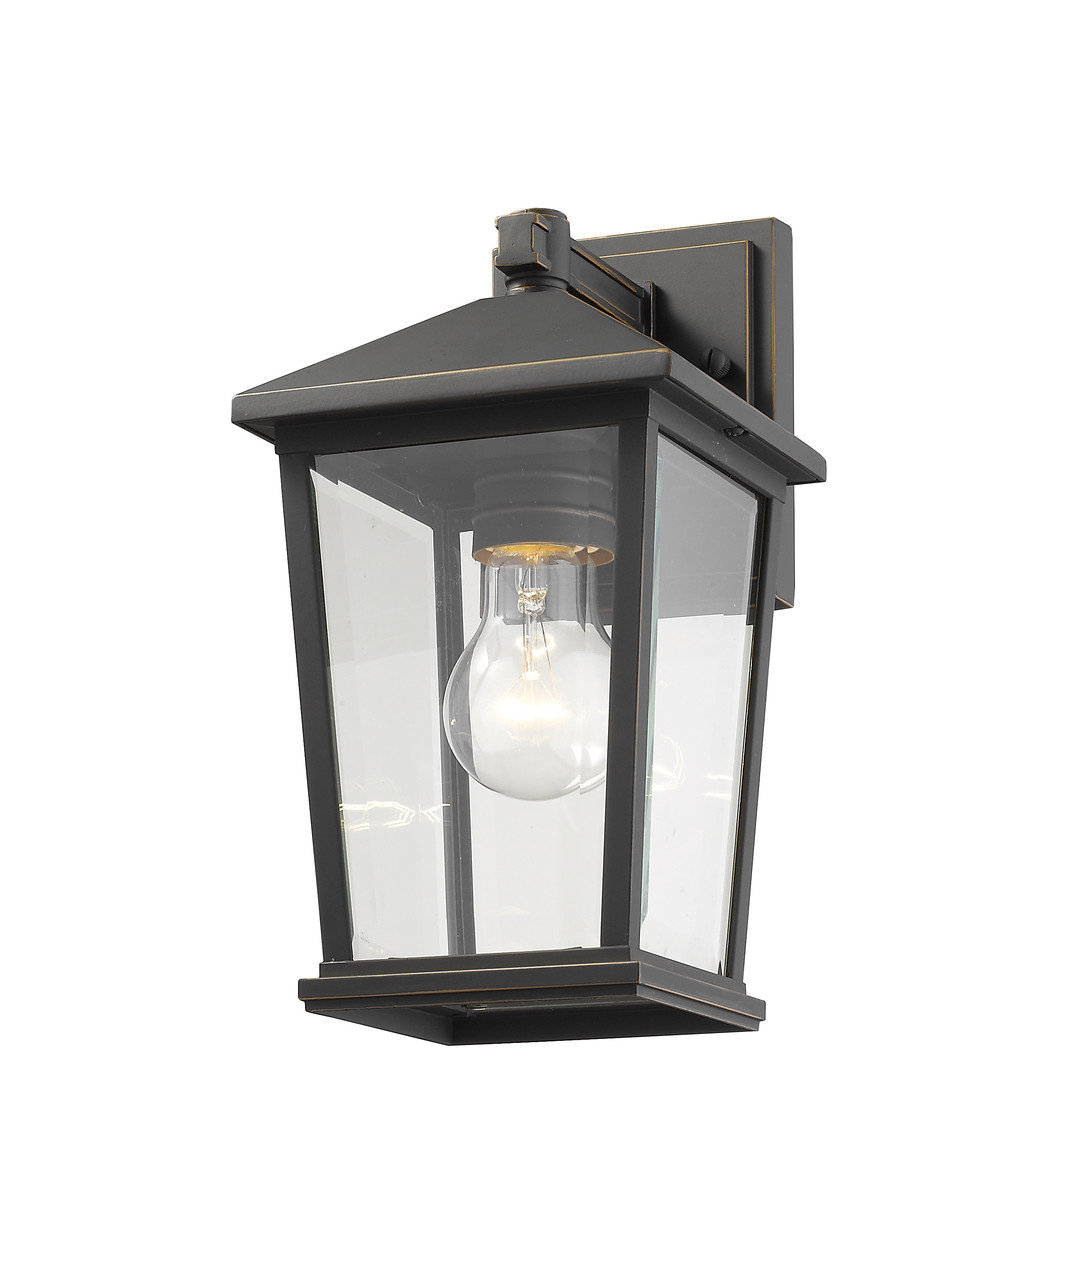 Z-LITE 568S-ORB 1 Light Outdoor Wall Sconce